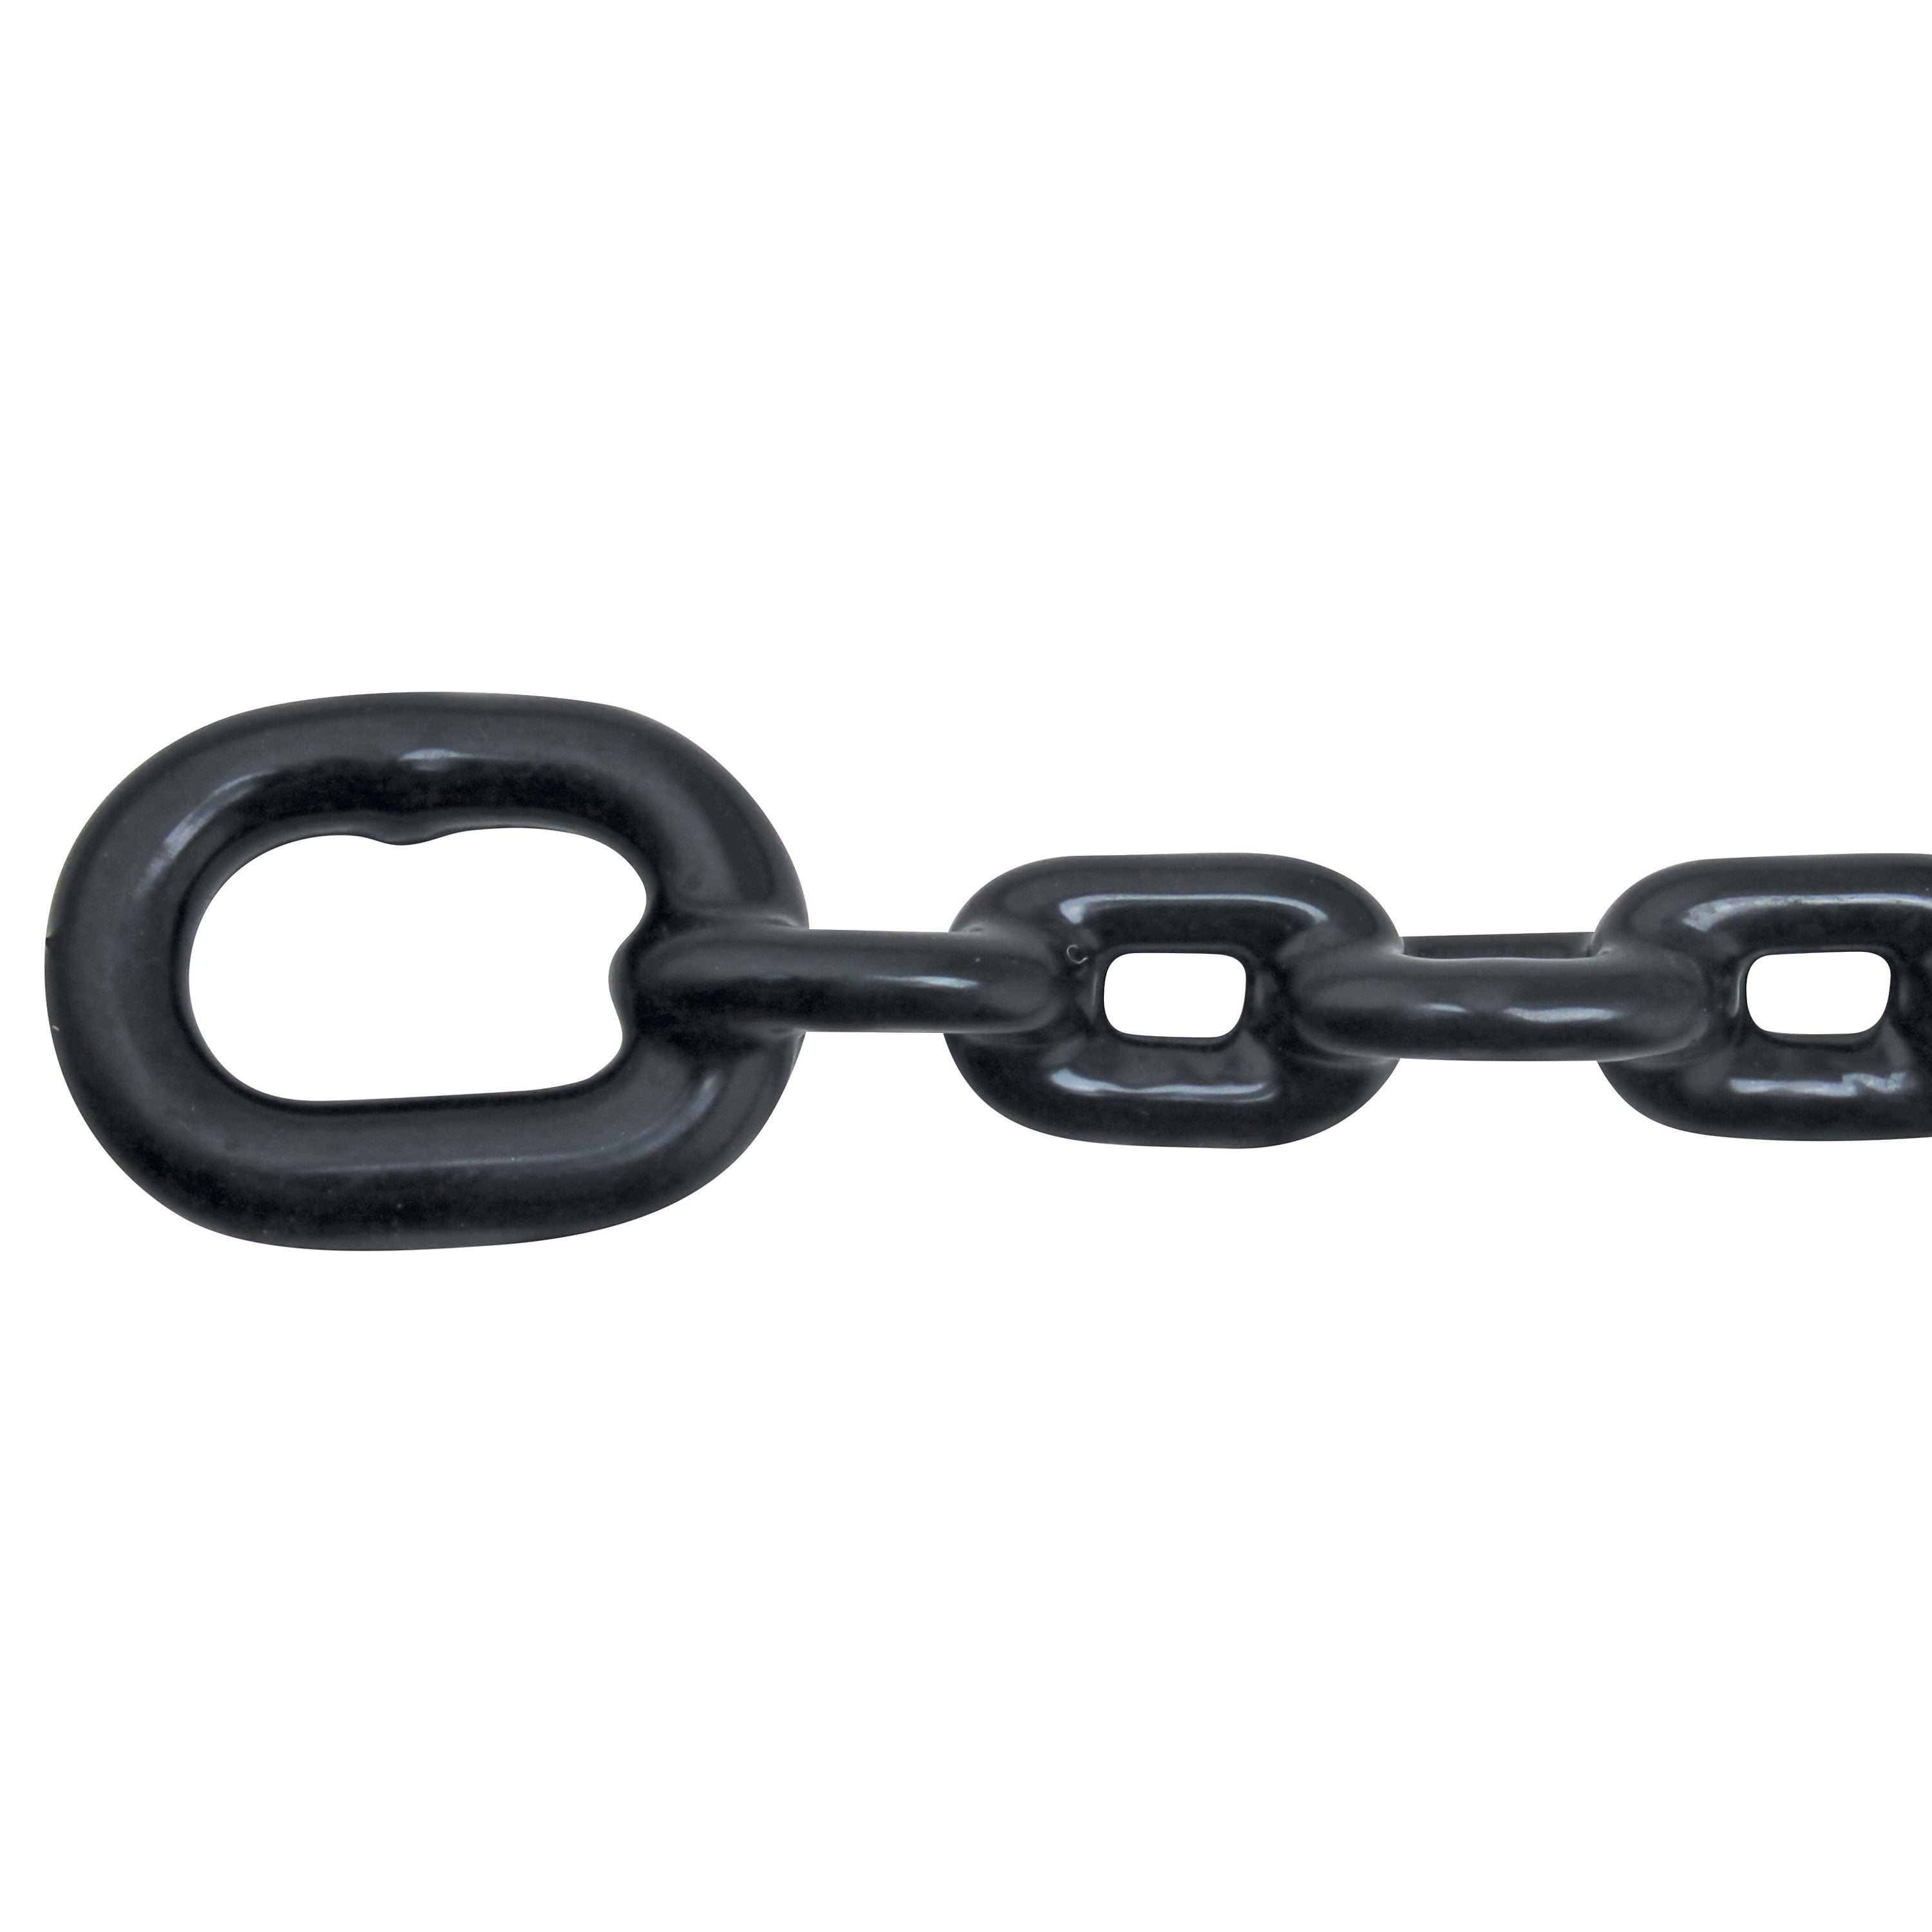 Extreme Max 3006.6596 BoatTector PVC-Coated Anchor Lead Chain - 1/4" x 4', Black